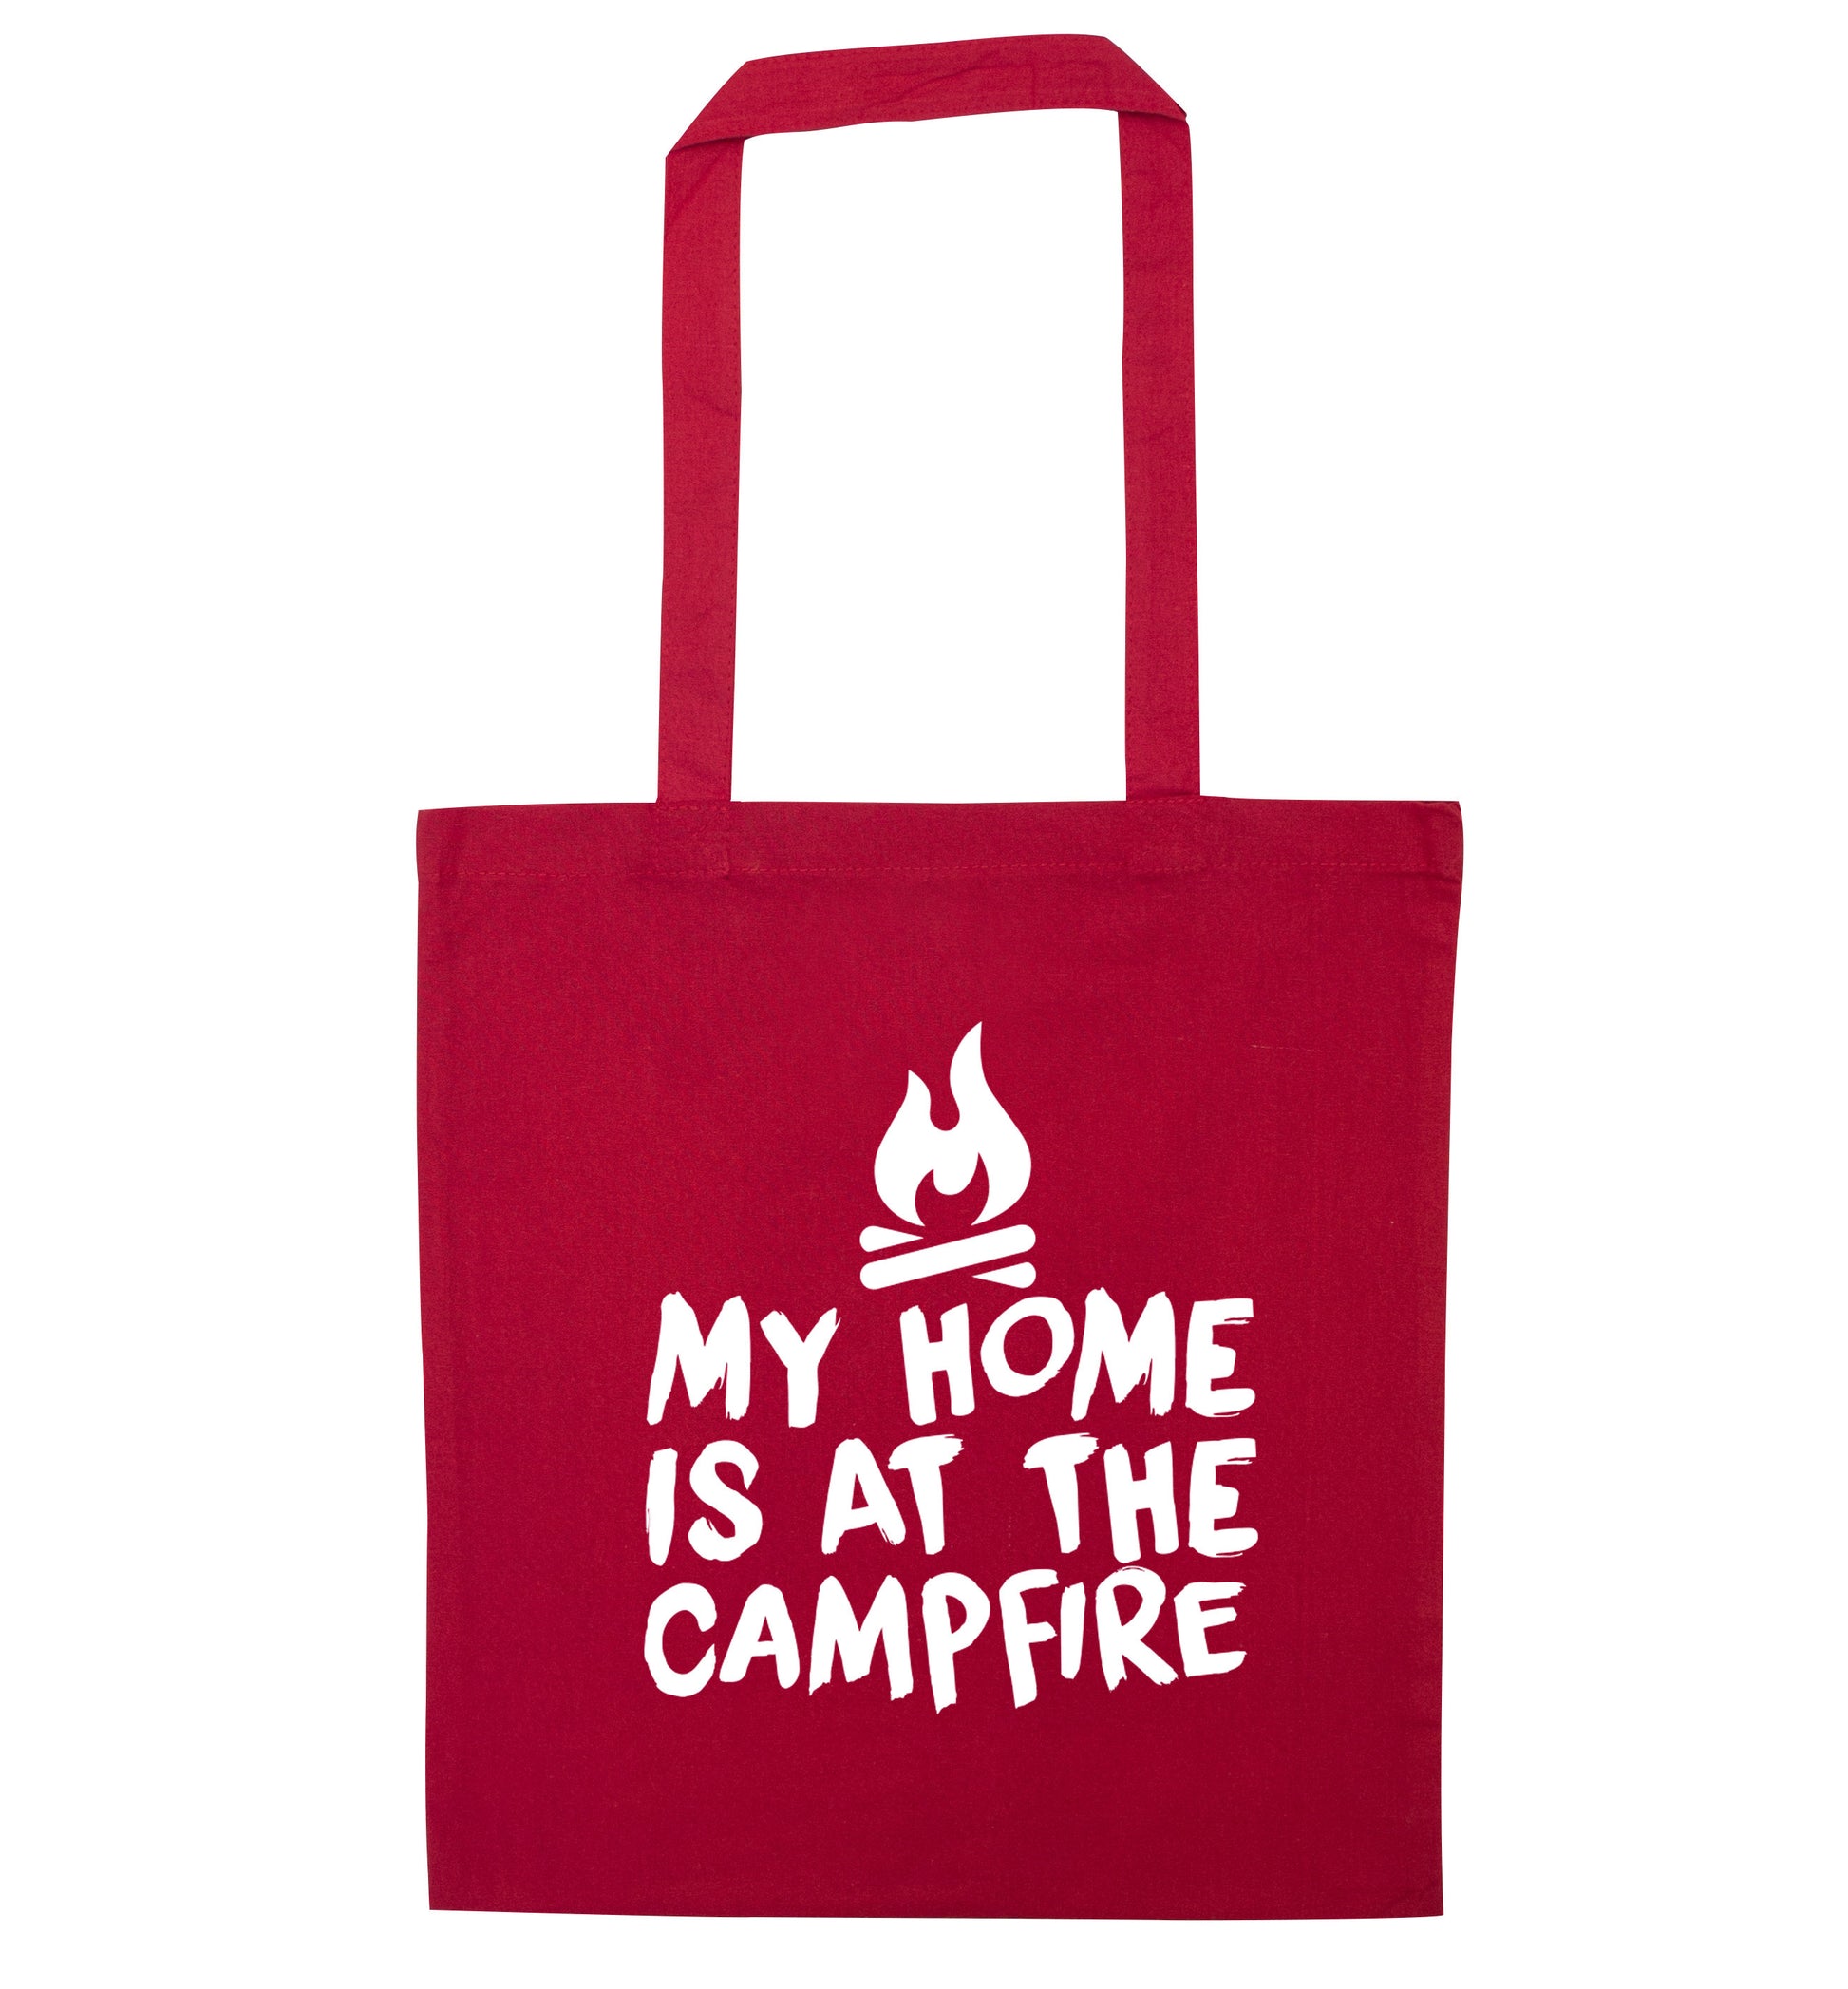 My home is at the campfire red tote bag